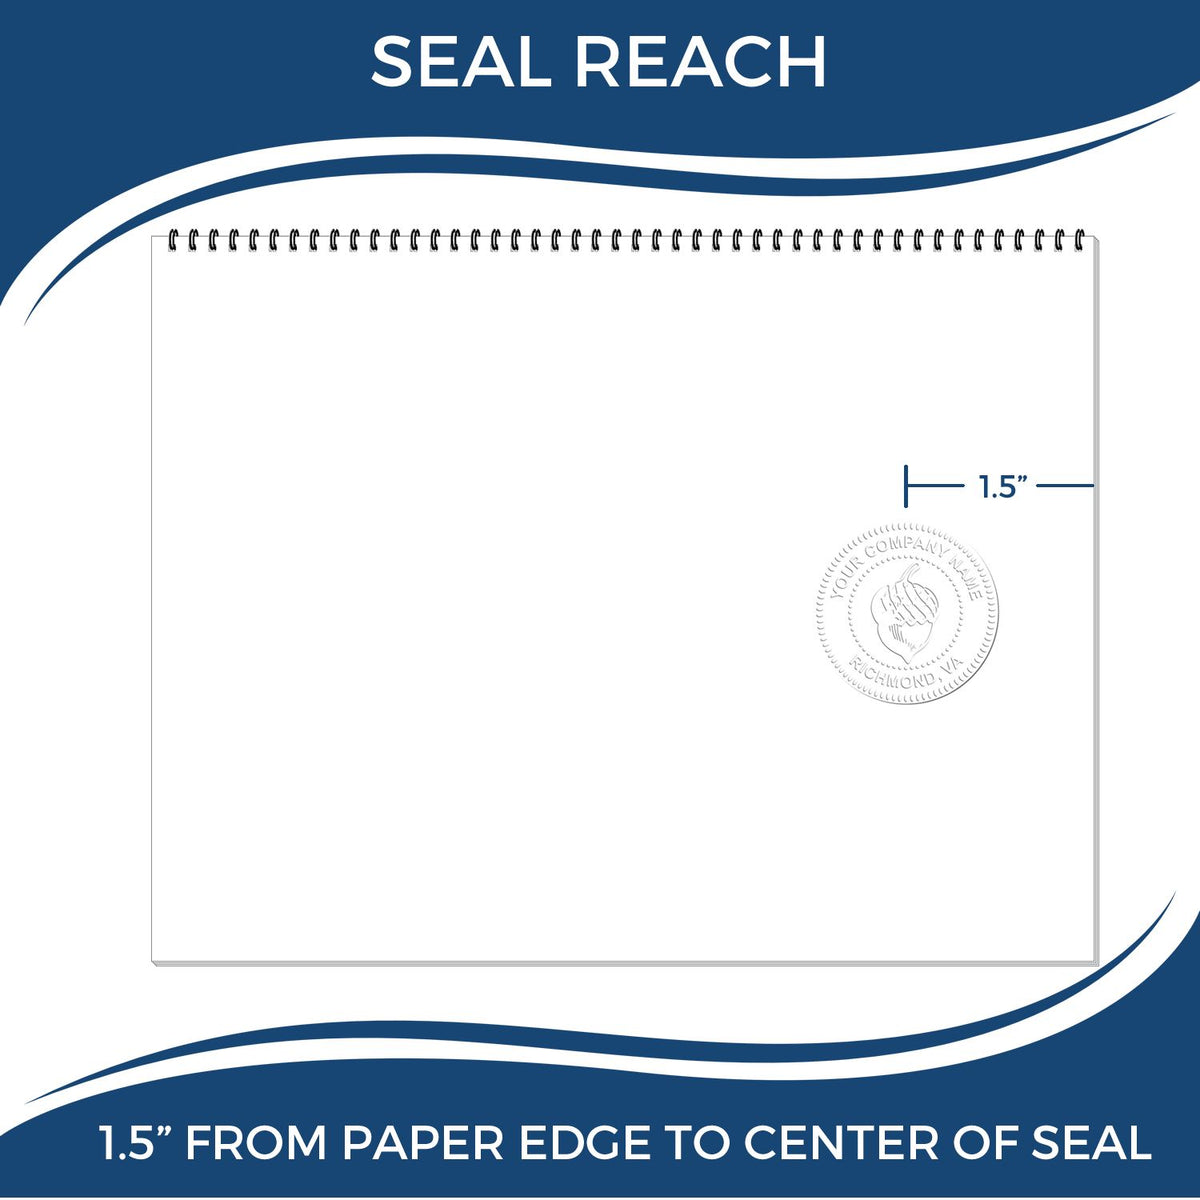 An infographic showing the seal reach which is represented by a ruler and a miniature seal image of the Handheld Delaware Professional Geologist Embosser